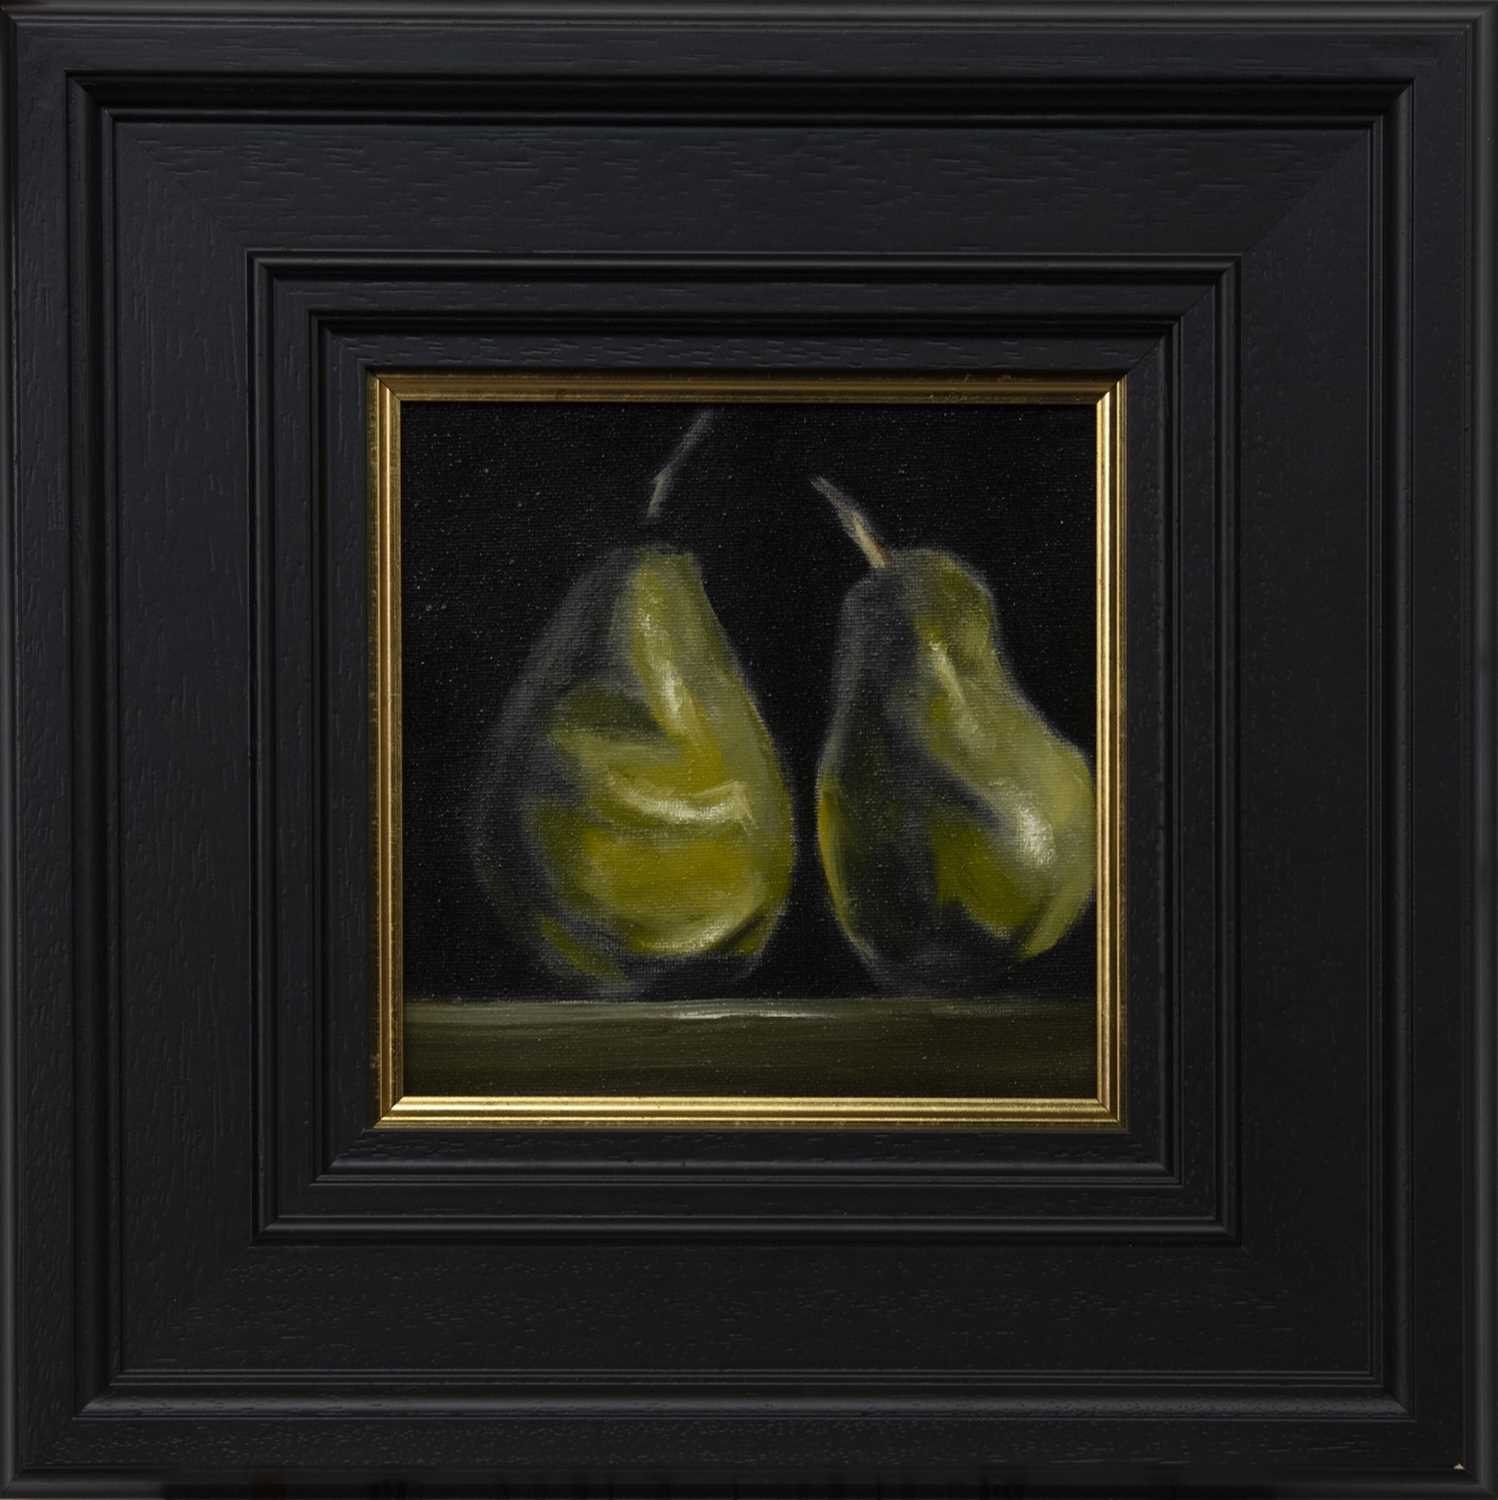 Lot 754 - A RIGHT PEAR, AN OIL BY NATASHA ARNOLD